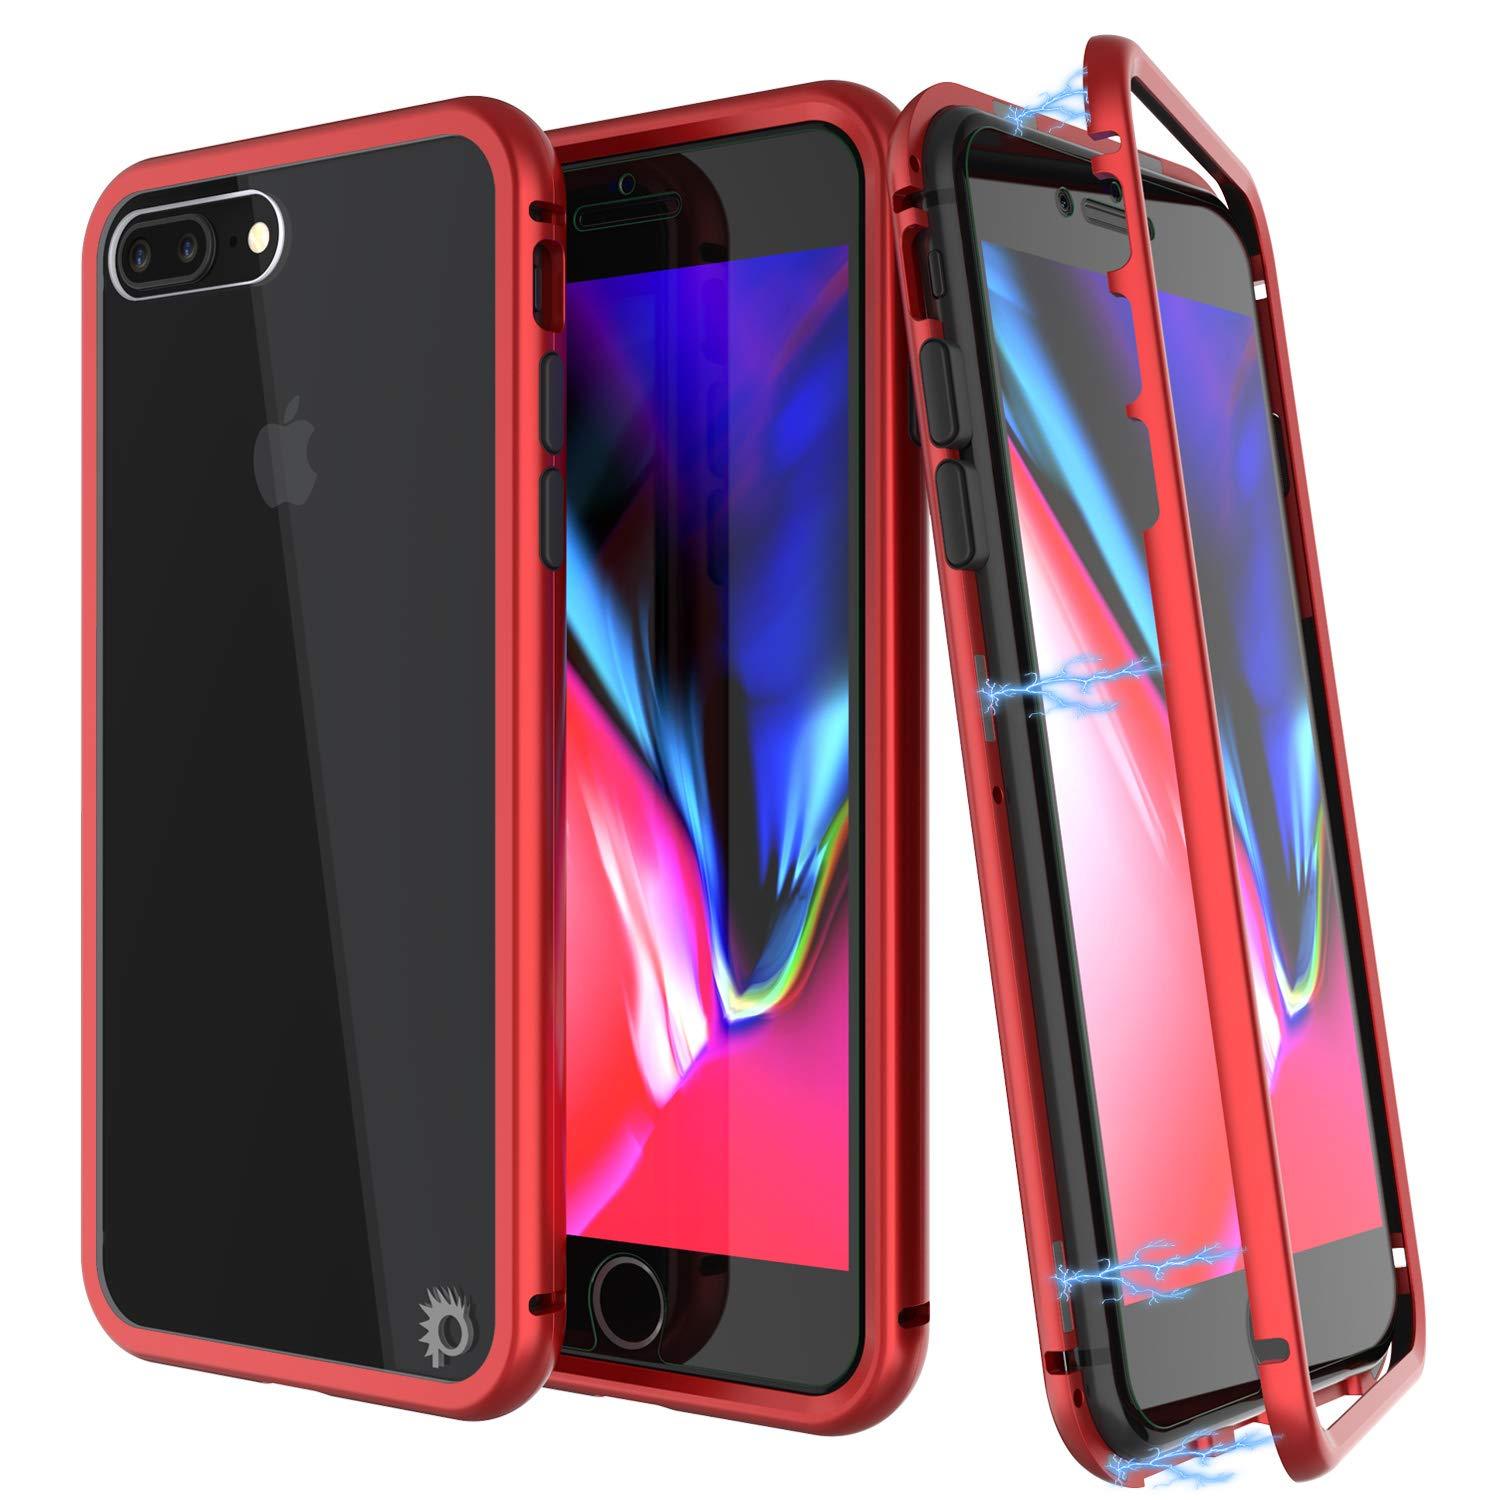 iPhone 7+ Plus Case, Punkcase Magnetix 2.0 Protective TPU Cover W/ Tempered Glass Screen Protector [Red]